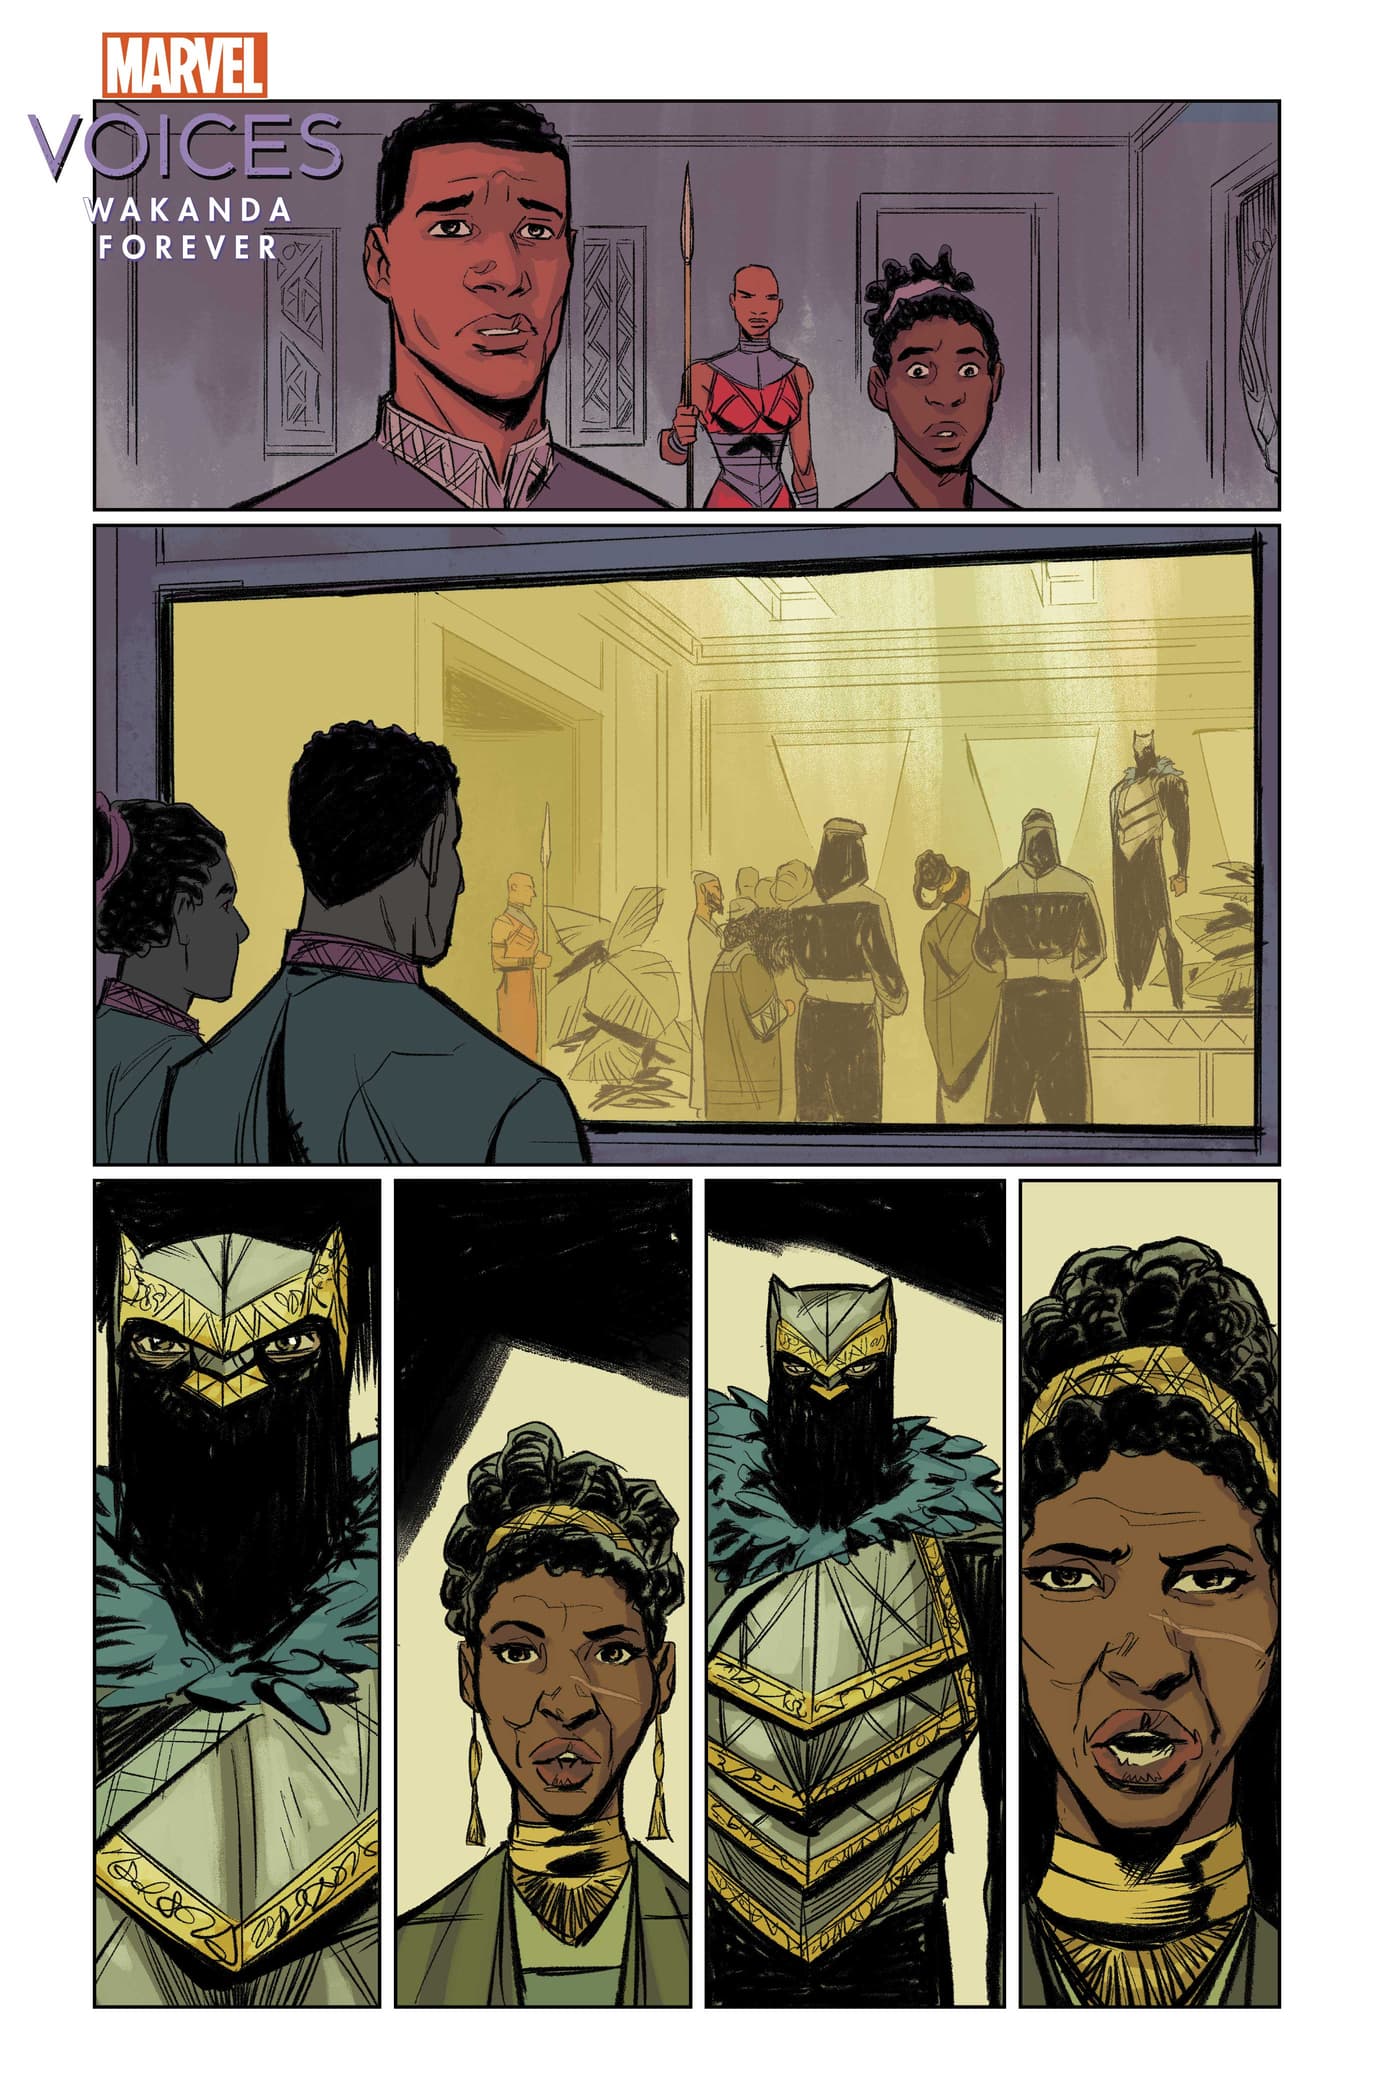 MARVEL’S VOICES: WAKANDA FOREVER #1—“The Education of Changamire” artwork by Todd Harris